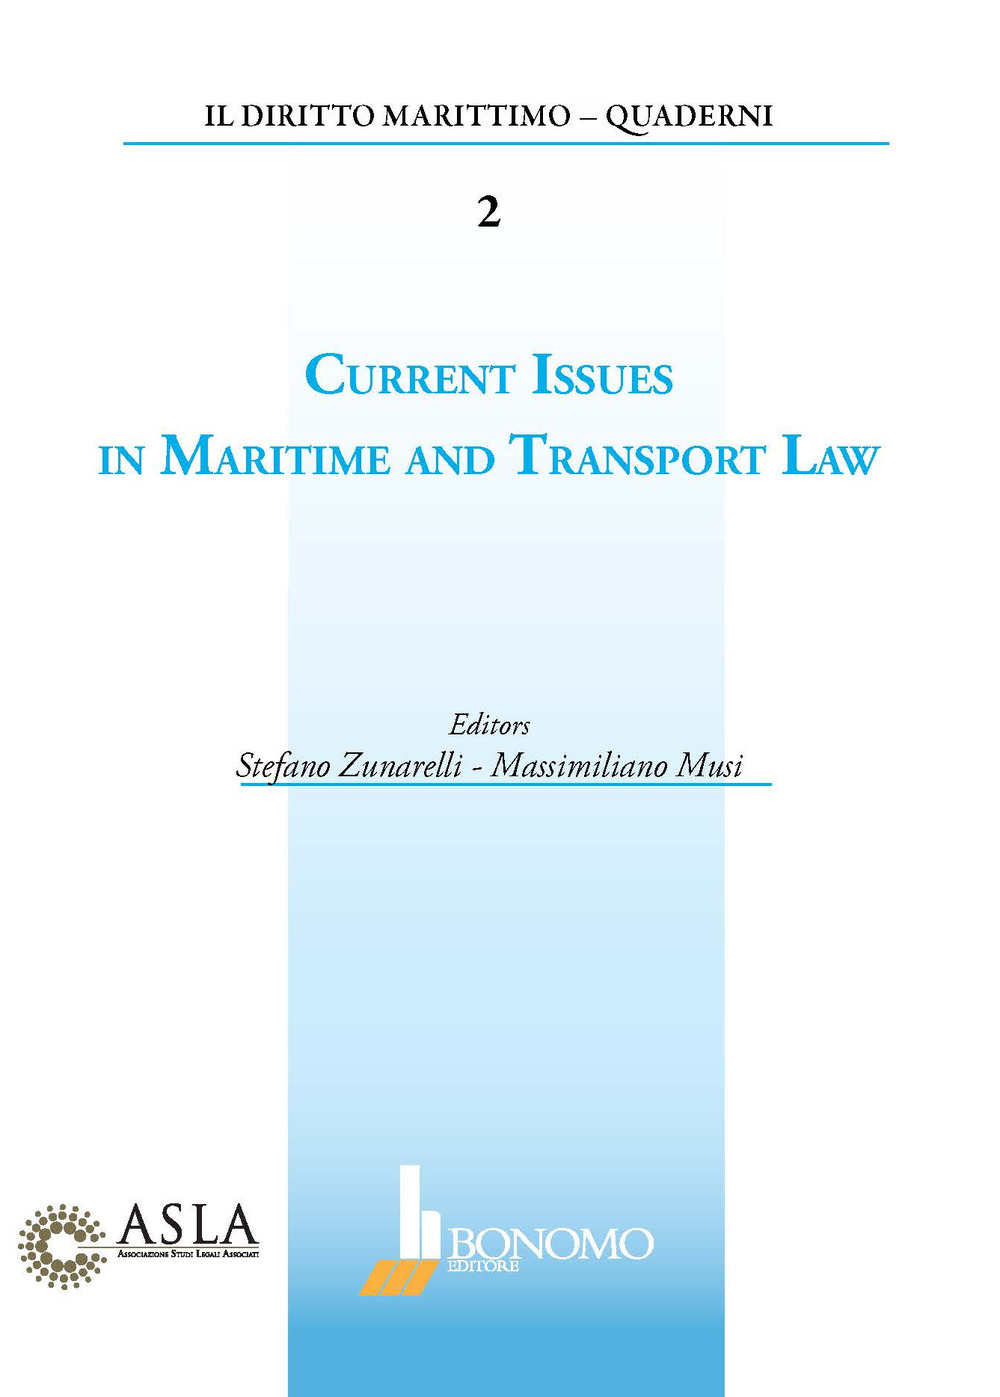 Crrent issues in maritime and transport law